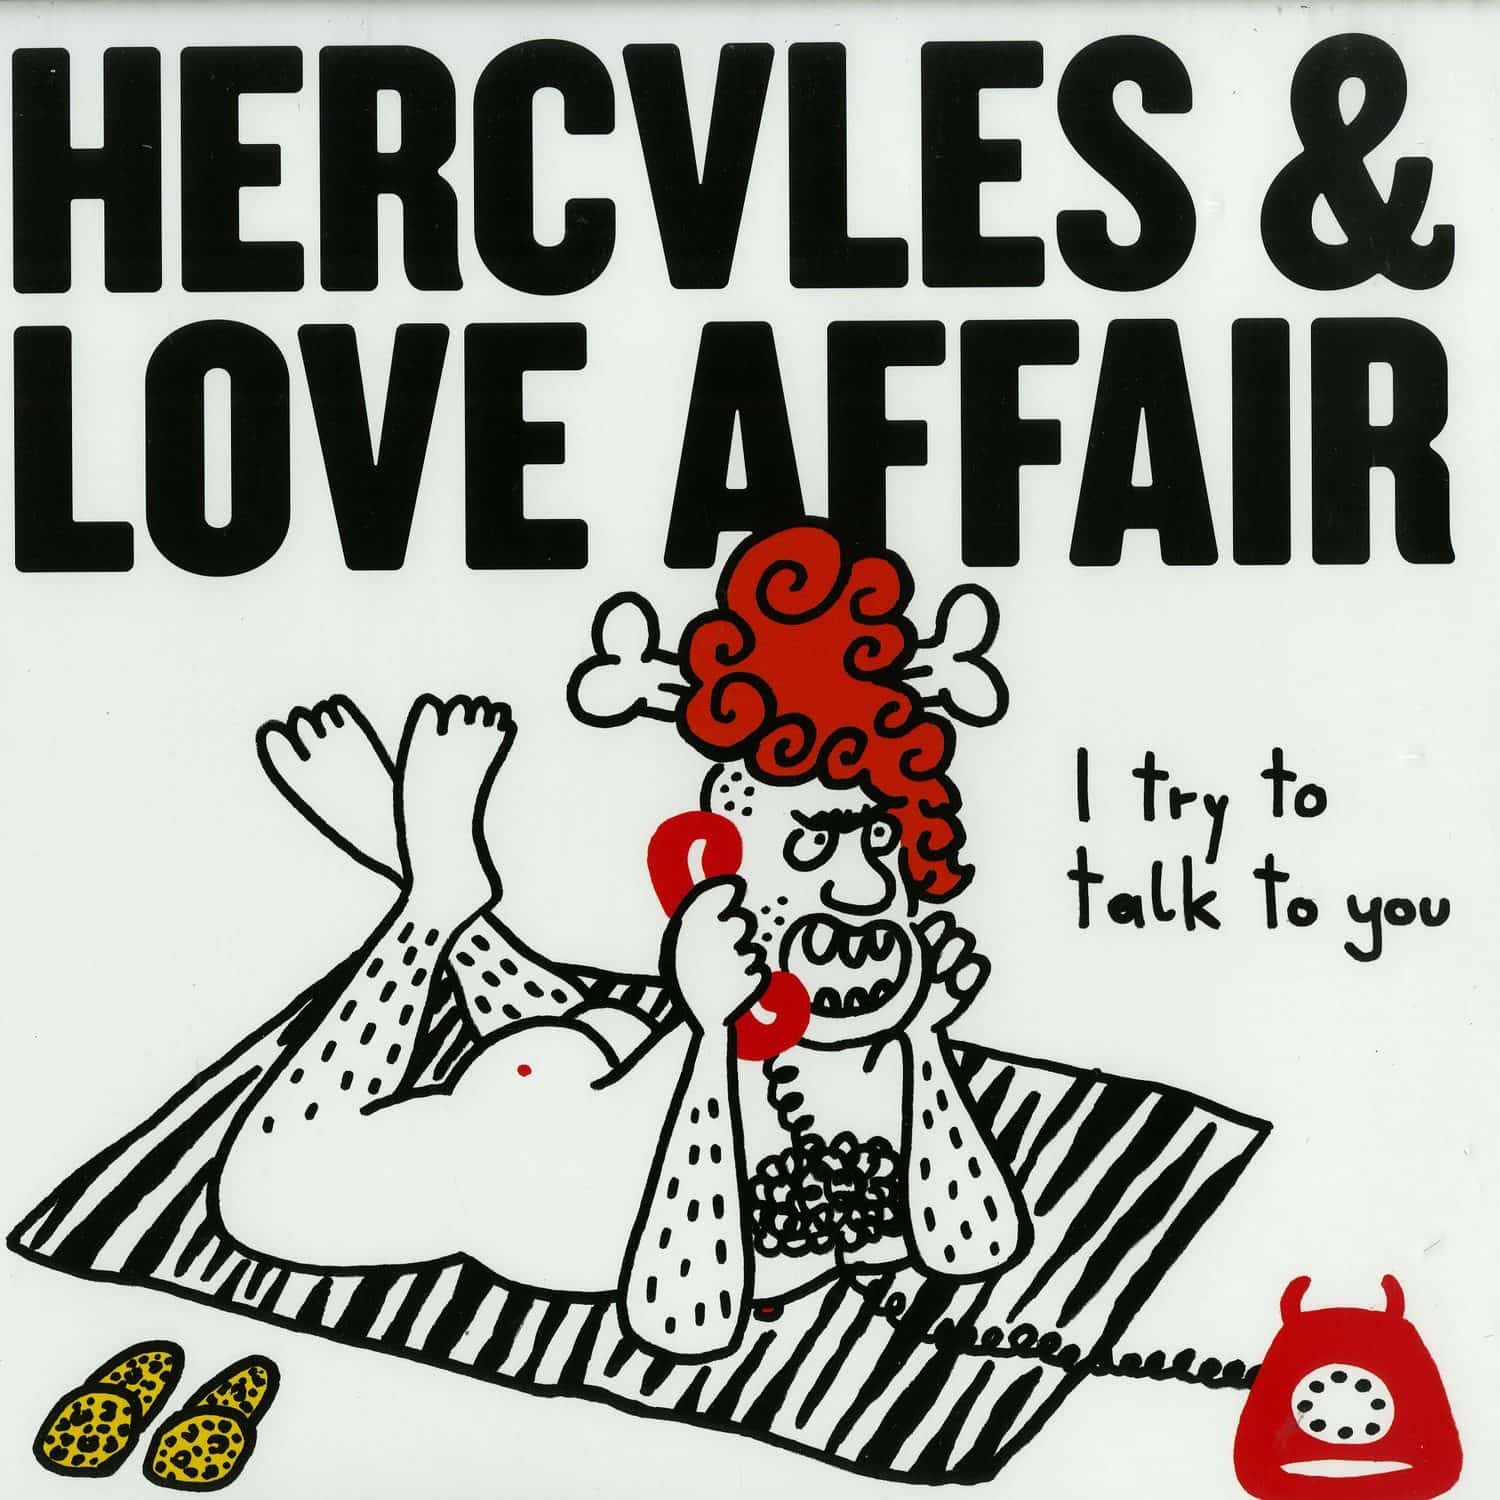 Hercules & Love Affair - I TRY TO TALK TO YOU 